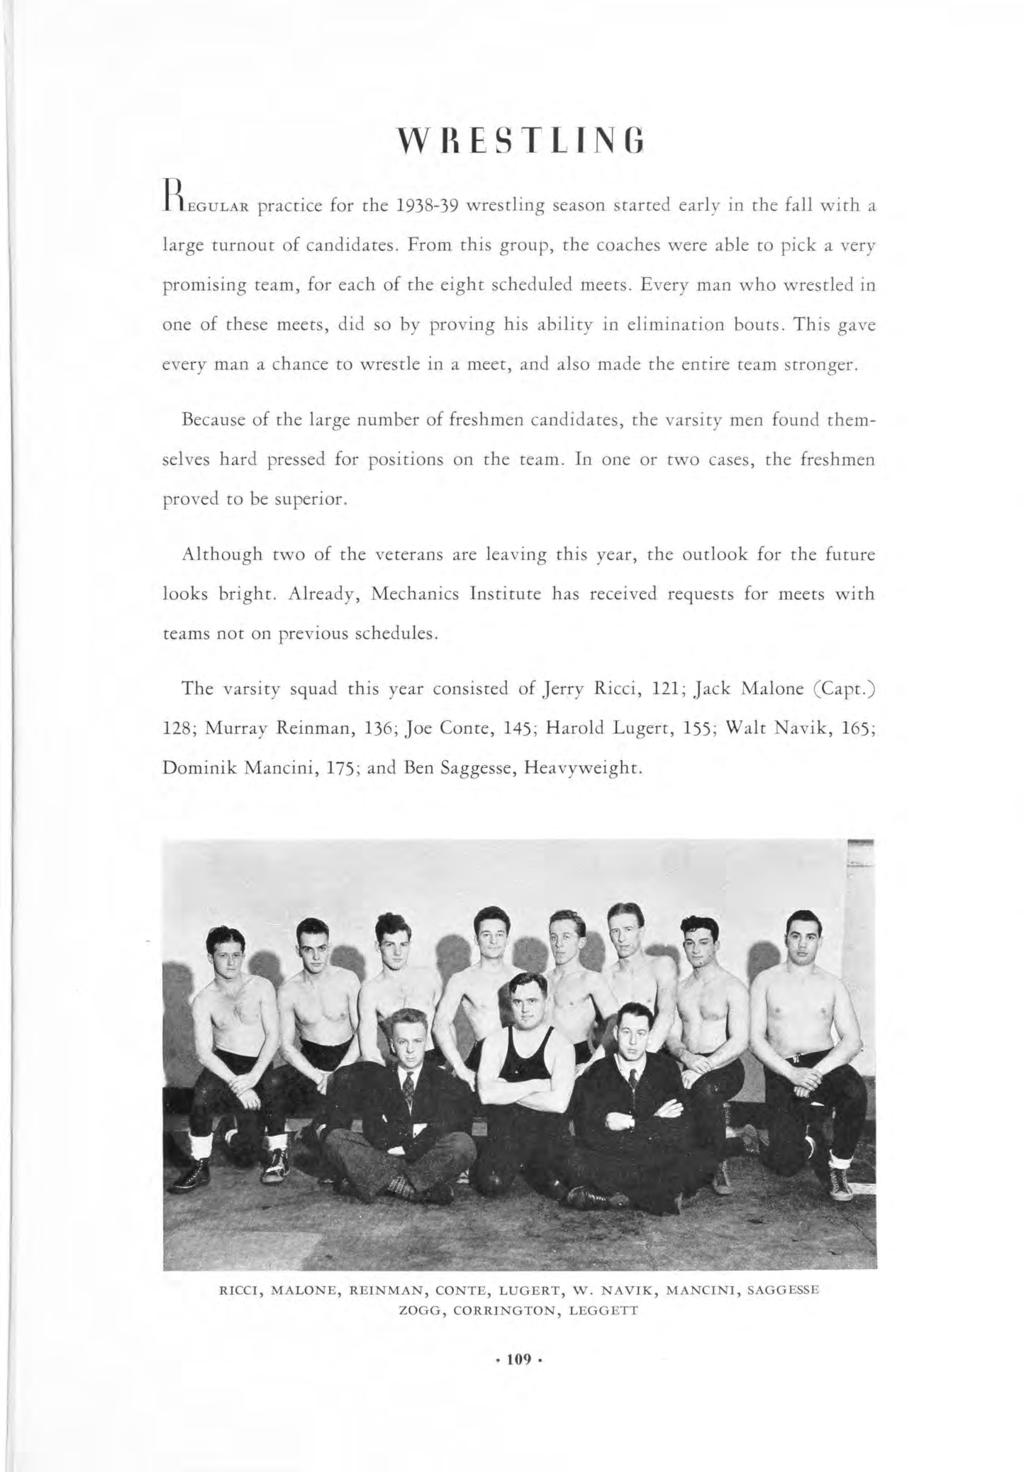 WRESTLING REGULAR practice for the 1938-39 wrestling season started early in the fall with a large turnout of candidates.